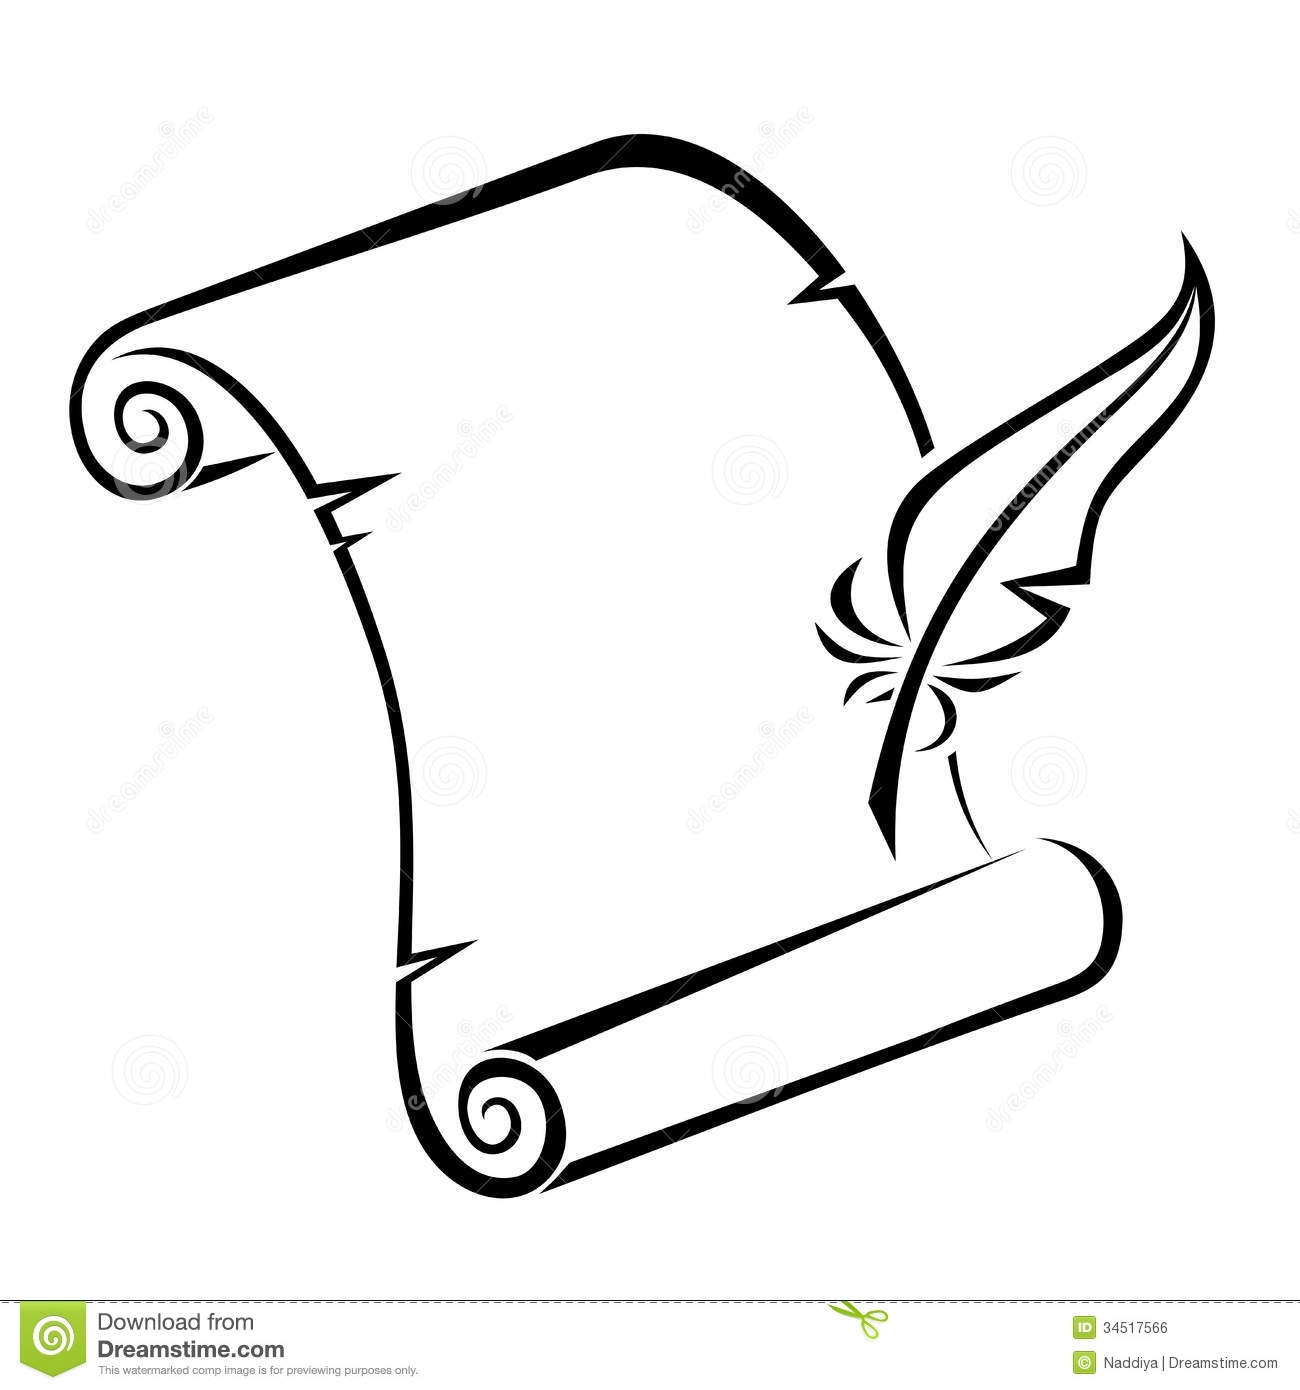 Collection quill clipart.